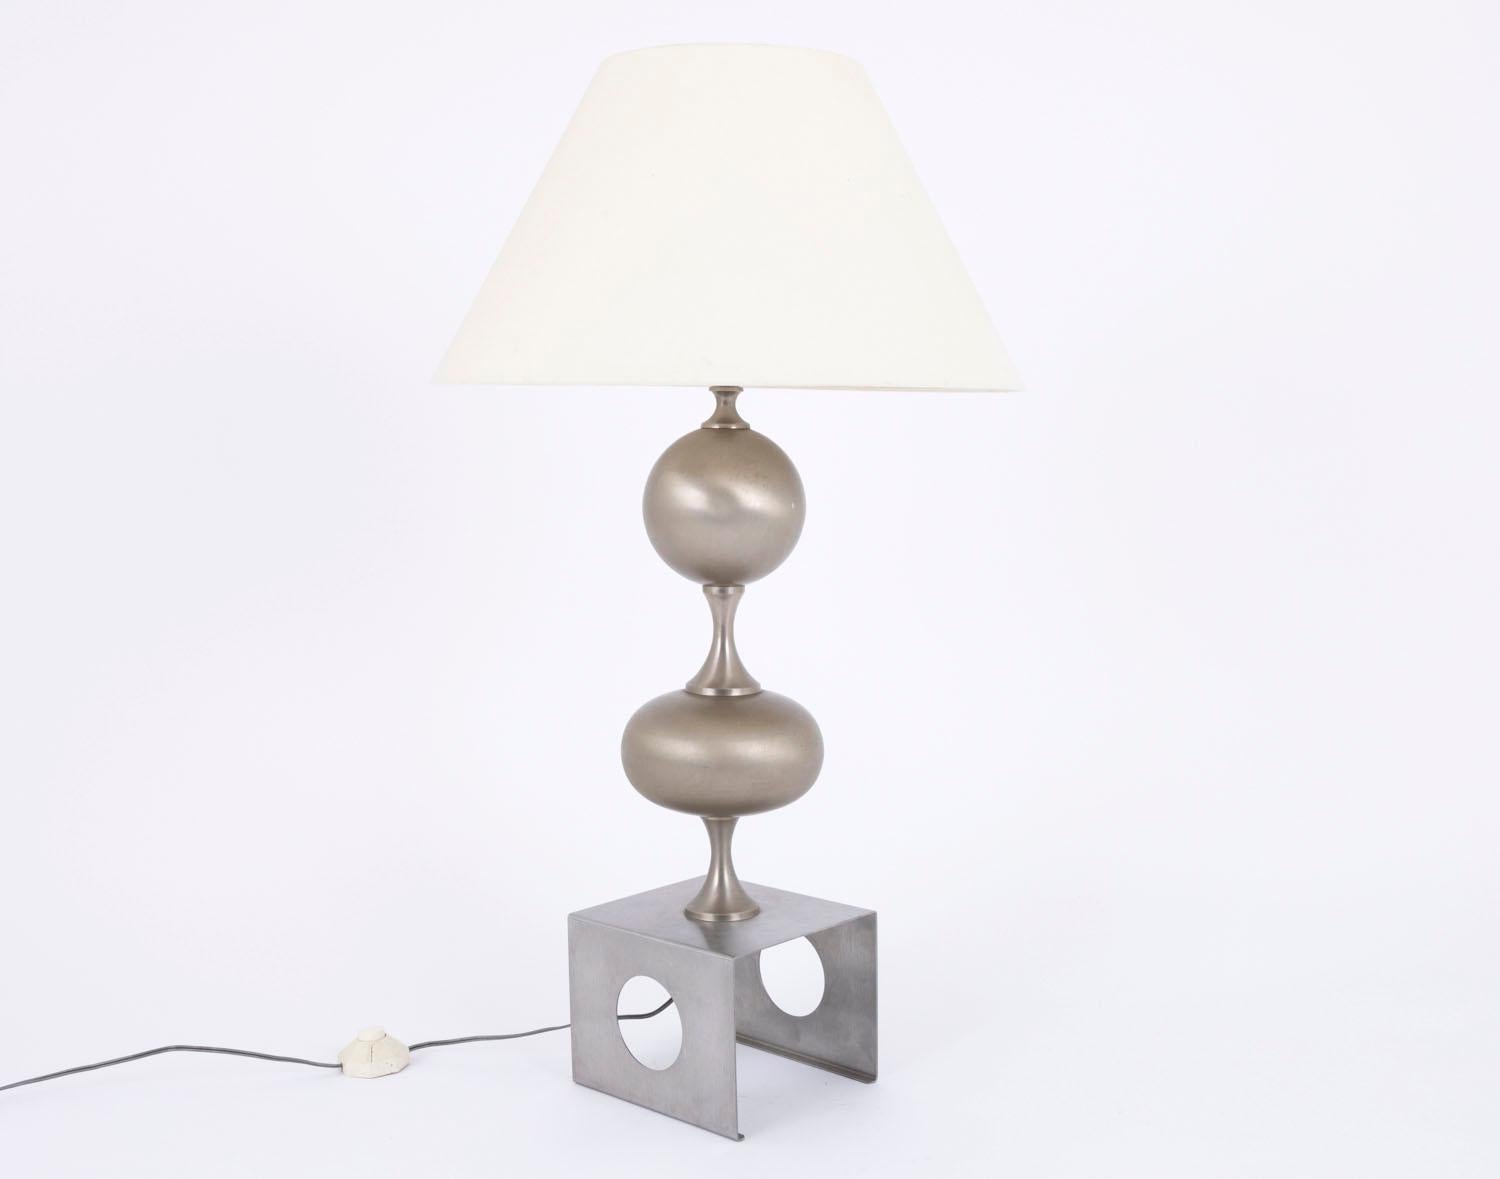 Lamp in brushed stainless steel with a shaft composed by a round ball and a flatened ball, linked each other by small stylized hourglasses. Square shape base with three sides, drilled with two holes on each side of the lamp.

Work realized in the